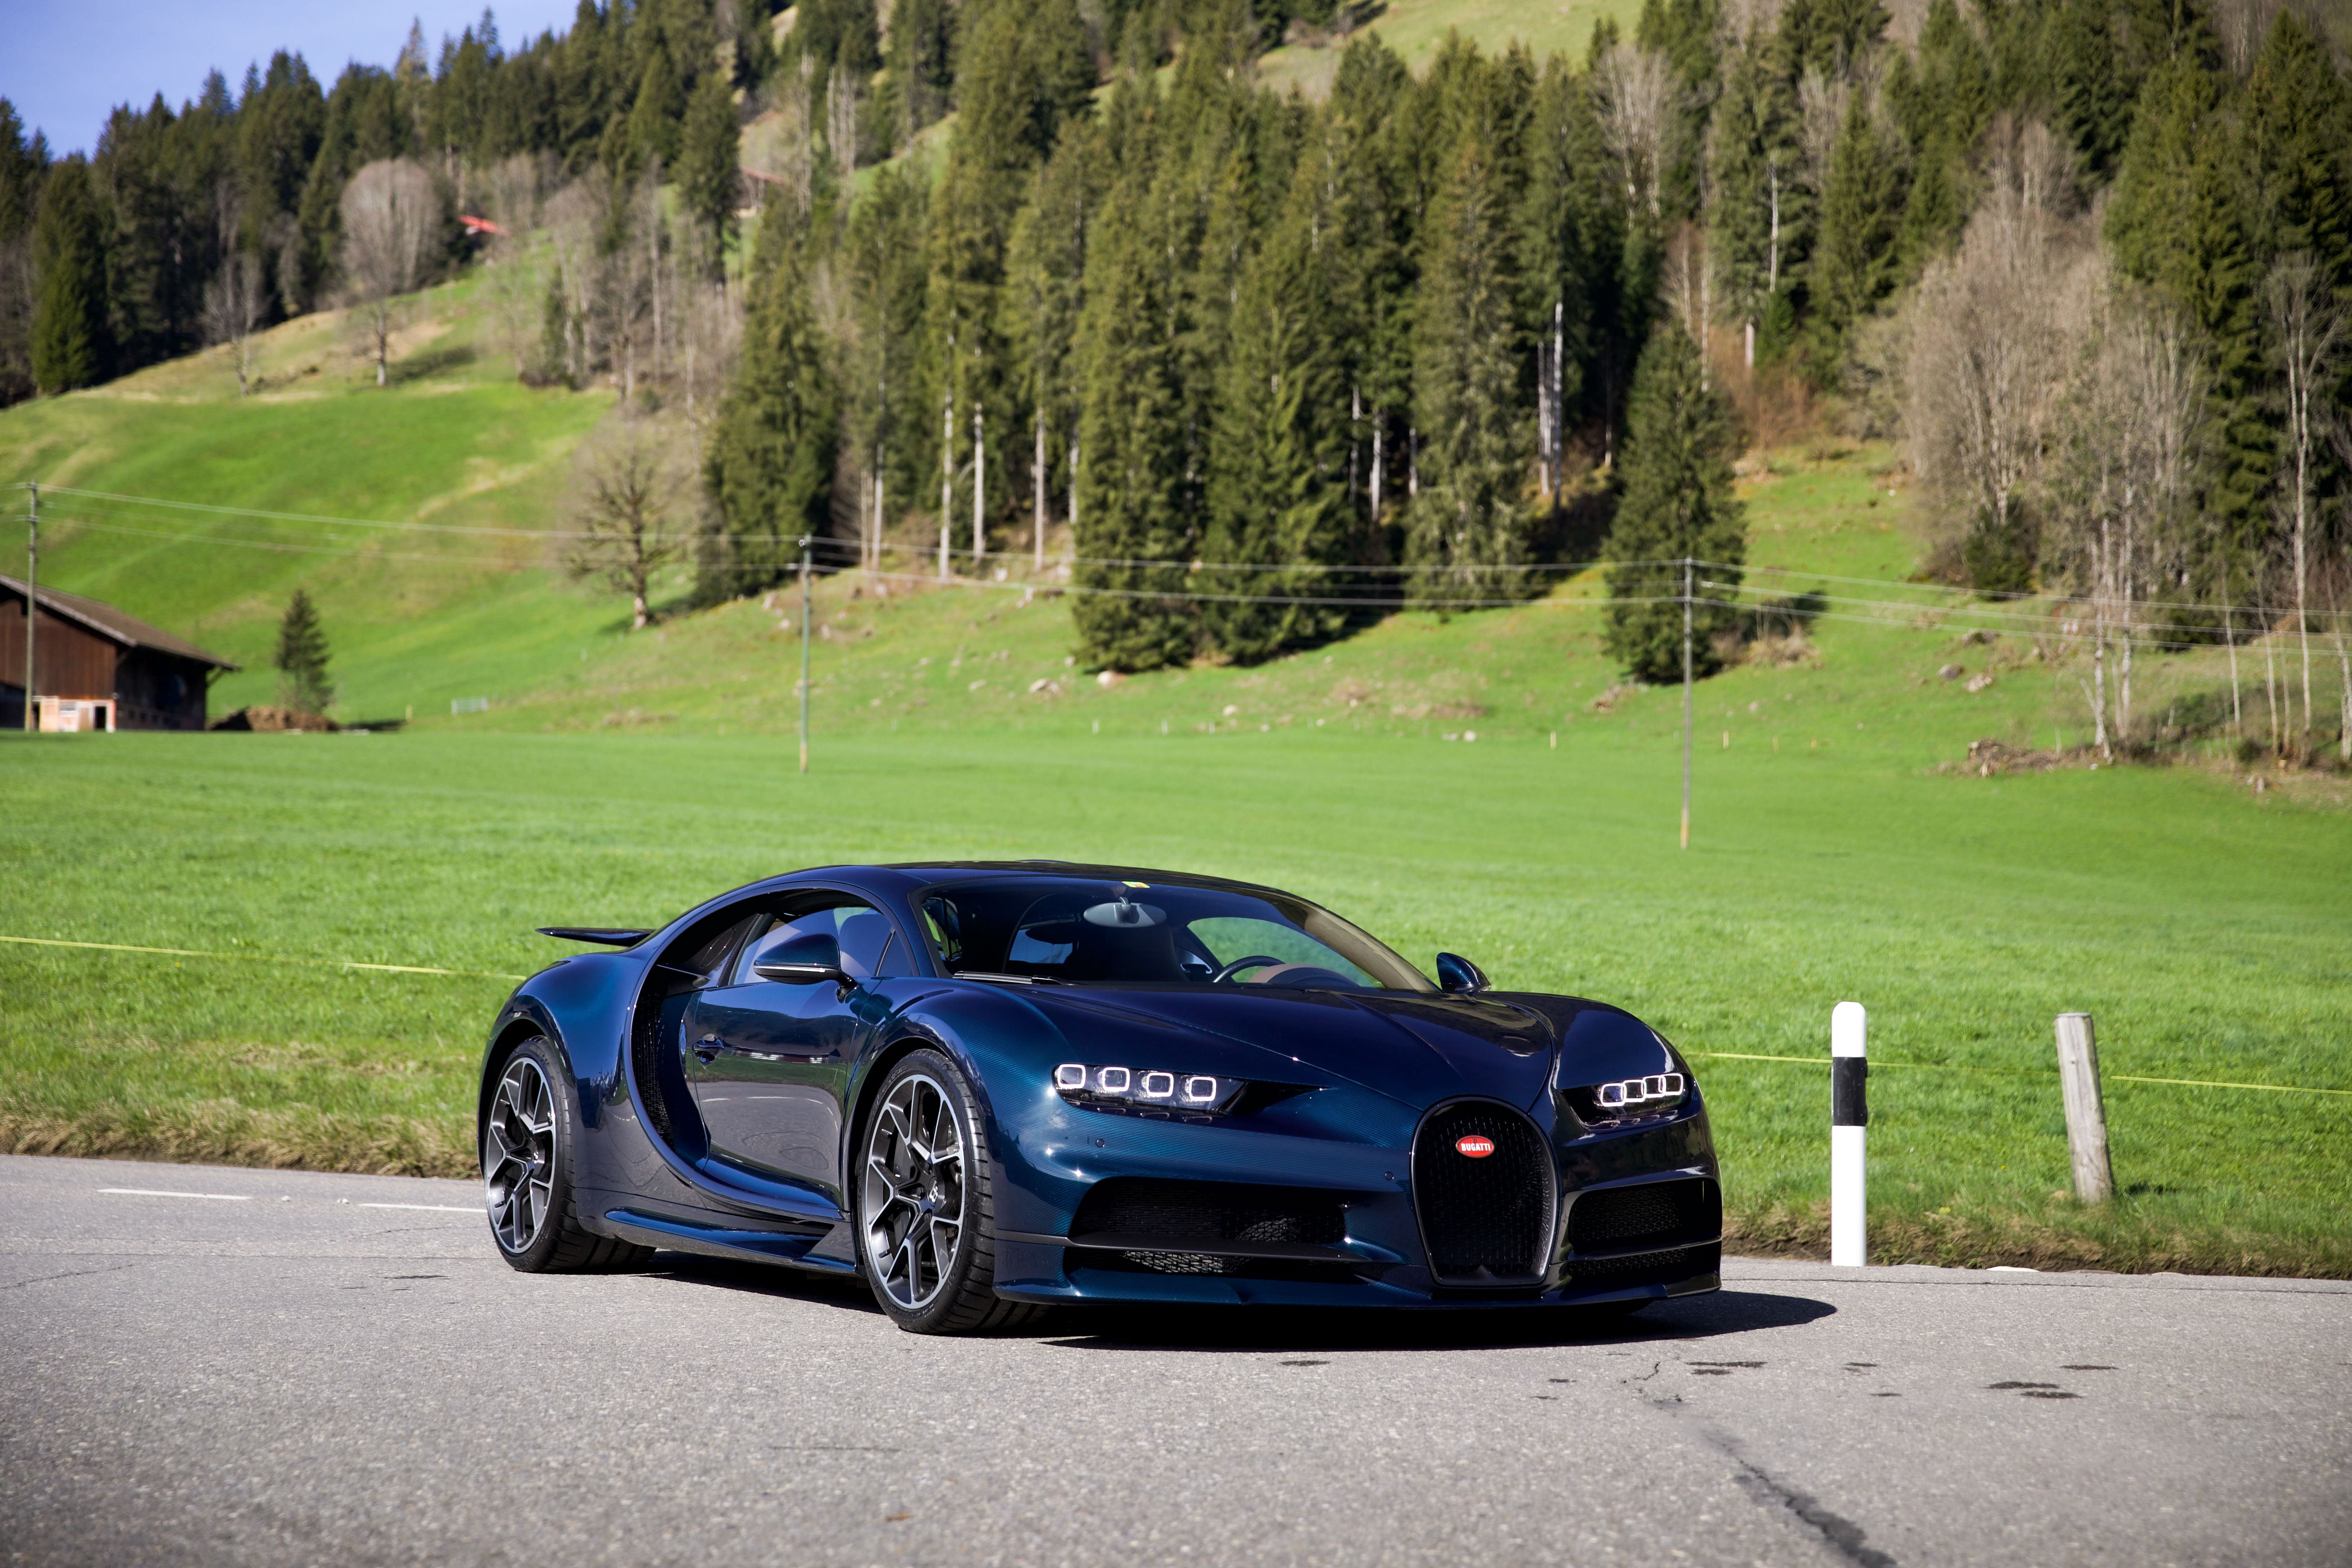 https://www.classicdriver.com/sites/default/files/users/218819/cars_images/218819-991057-car-20231124_105627-chiron_1_-_5.jpg